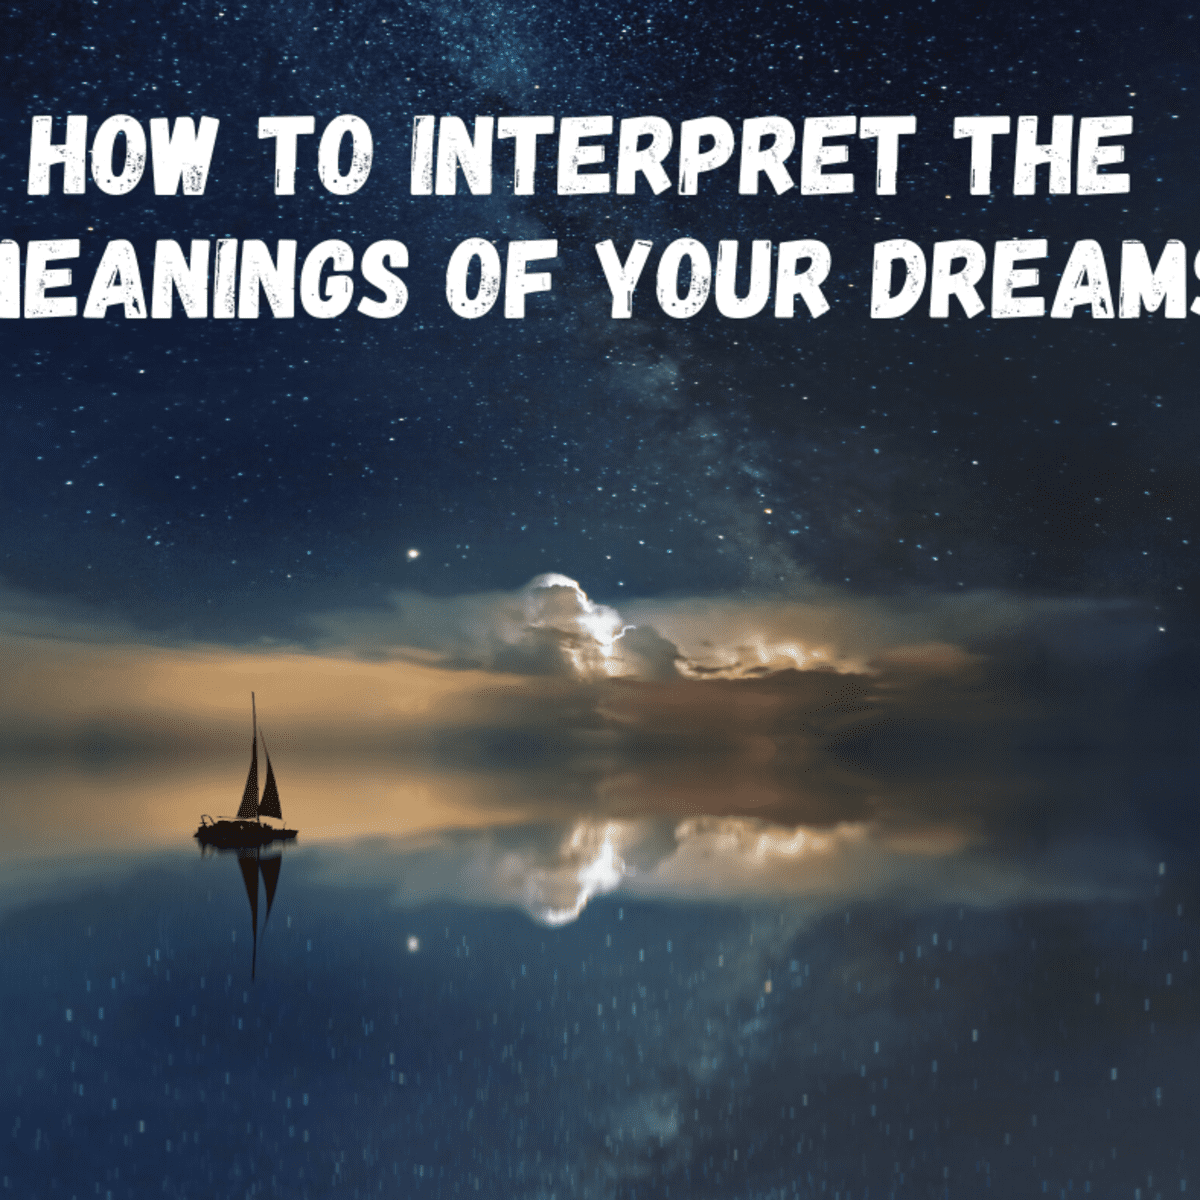 Mopping The Floor In Dreams: Common Dreams Themes